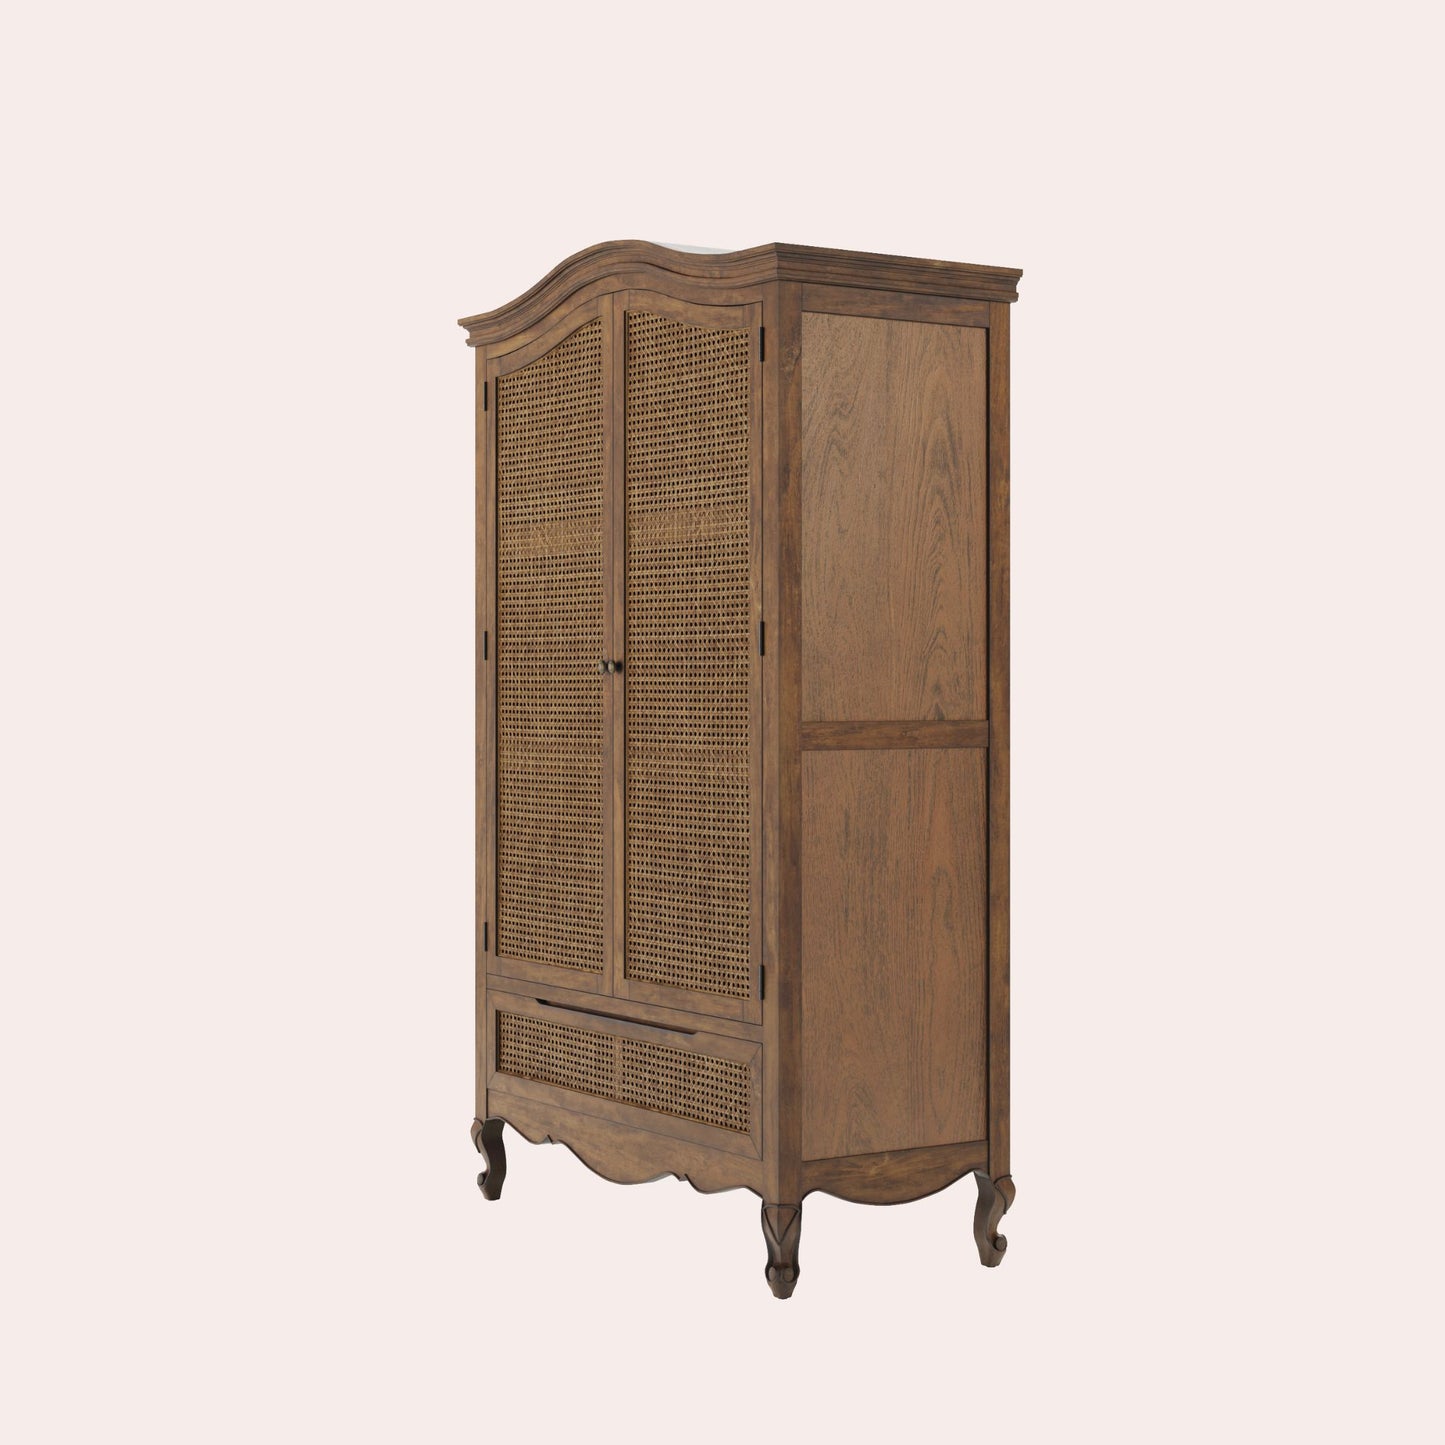 Side image of Walnut wardrobe with curved leg details